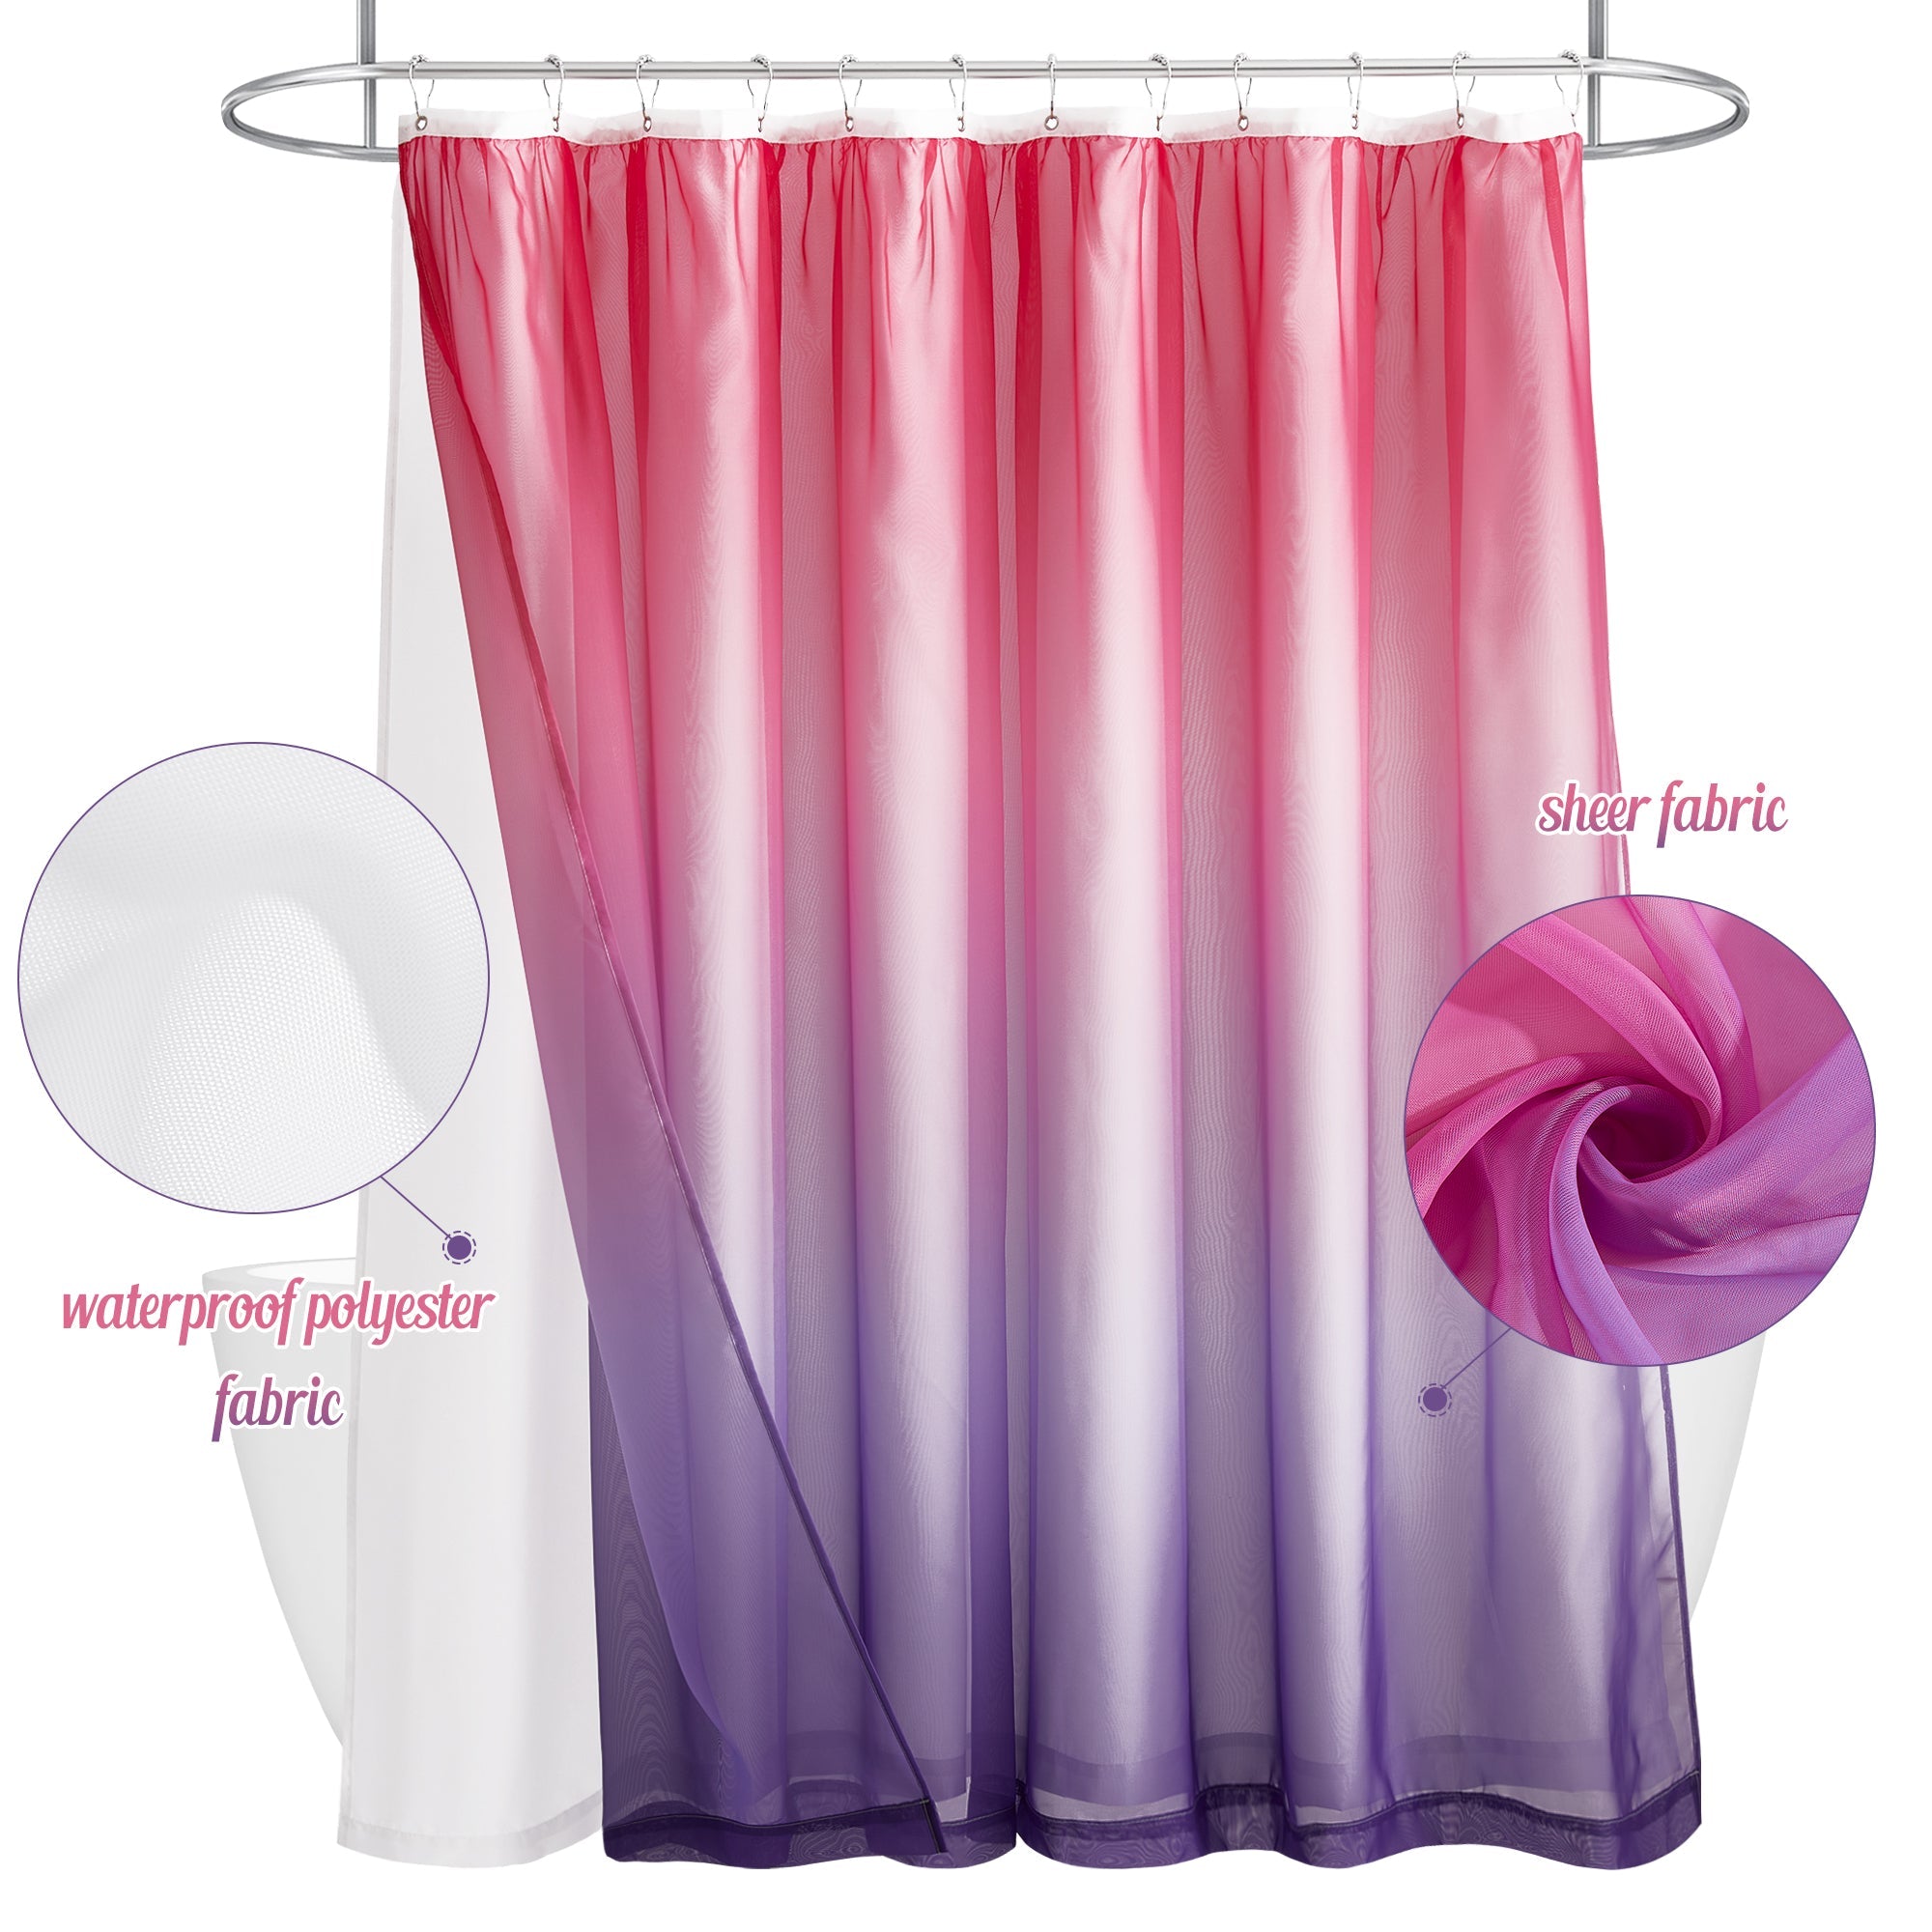 Double Layer Pastel Rainbow Ombre Shower Curtain 1 Panel KGORGE Store